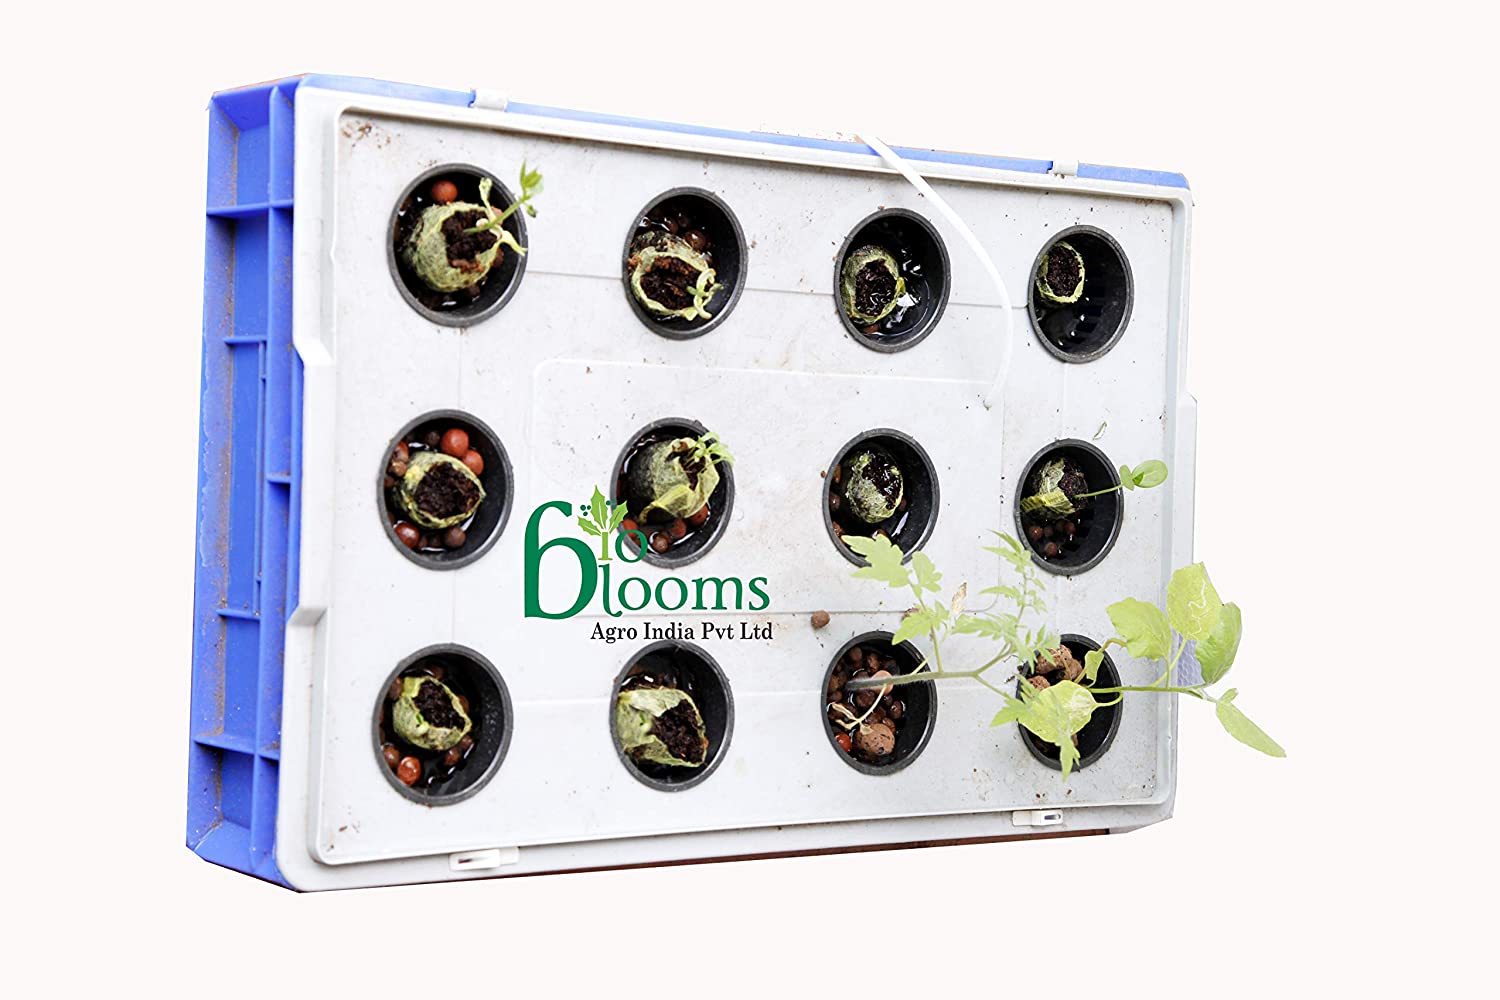 Hydroponics Starter Crate, Netted pots, Coir Coins, Seeds, Air Pump, Nutrients, Video DVD Manual Kit